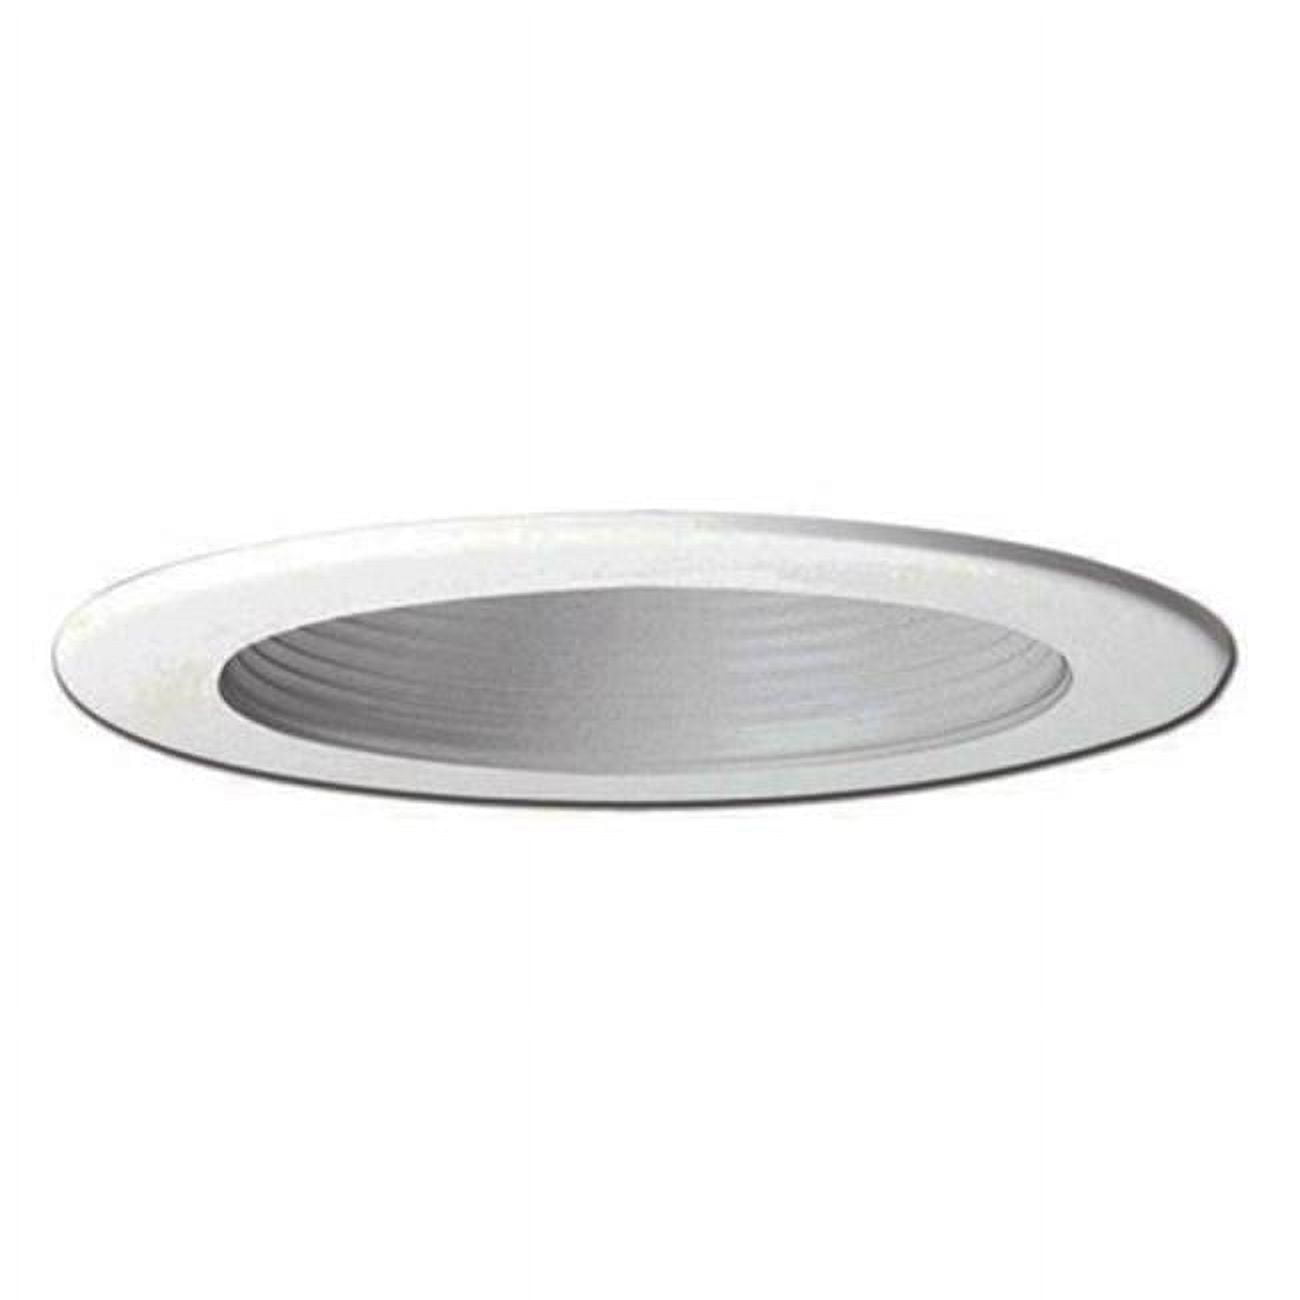 Re-4001wb 4 In. Recessed Lighting Plastic Step Baffle With Trim Ring - White